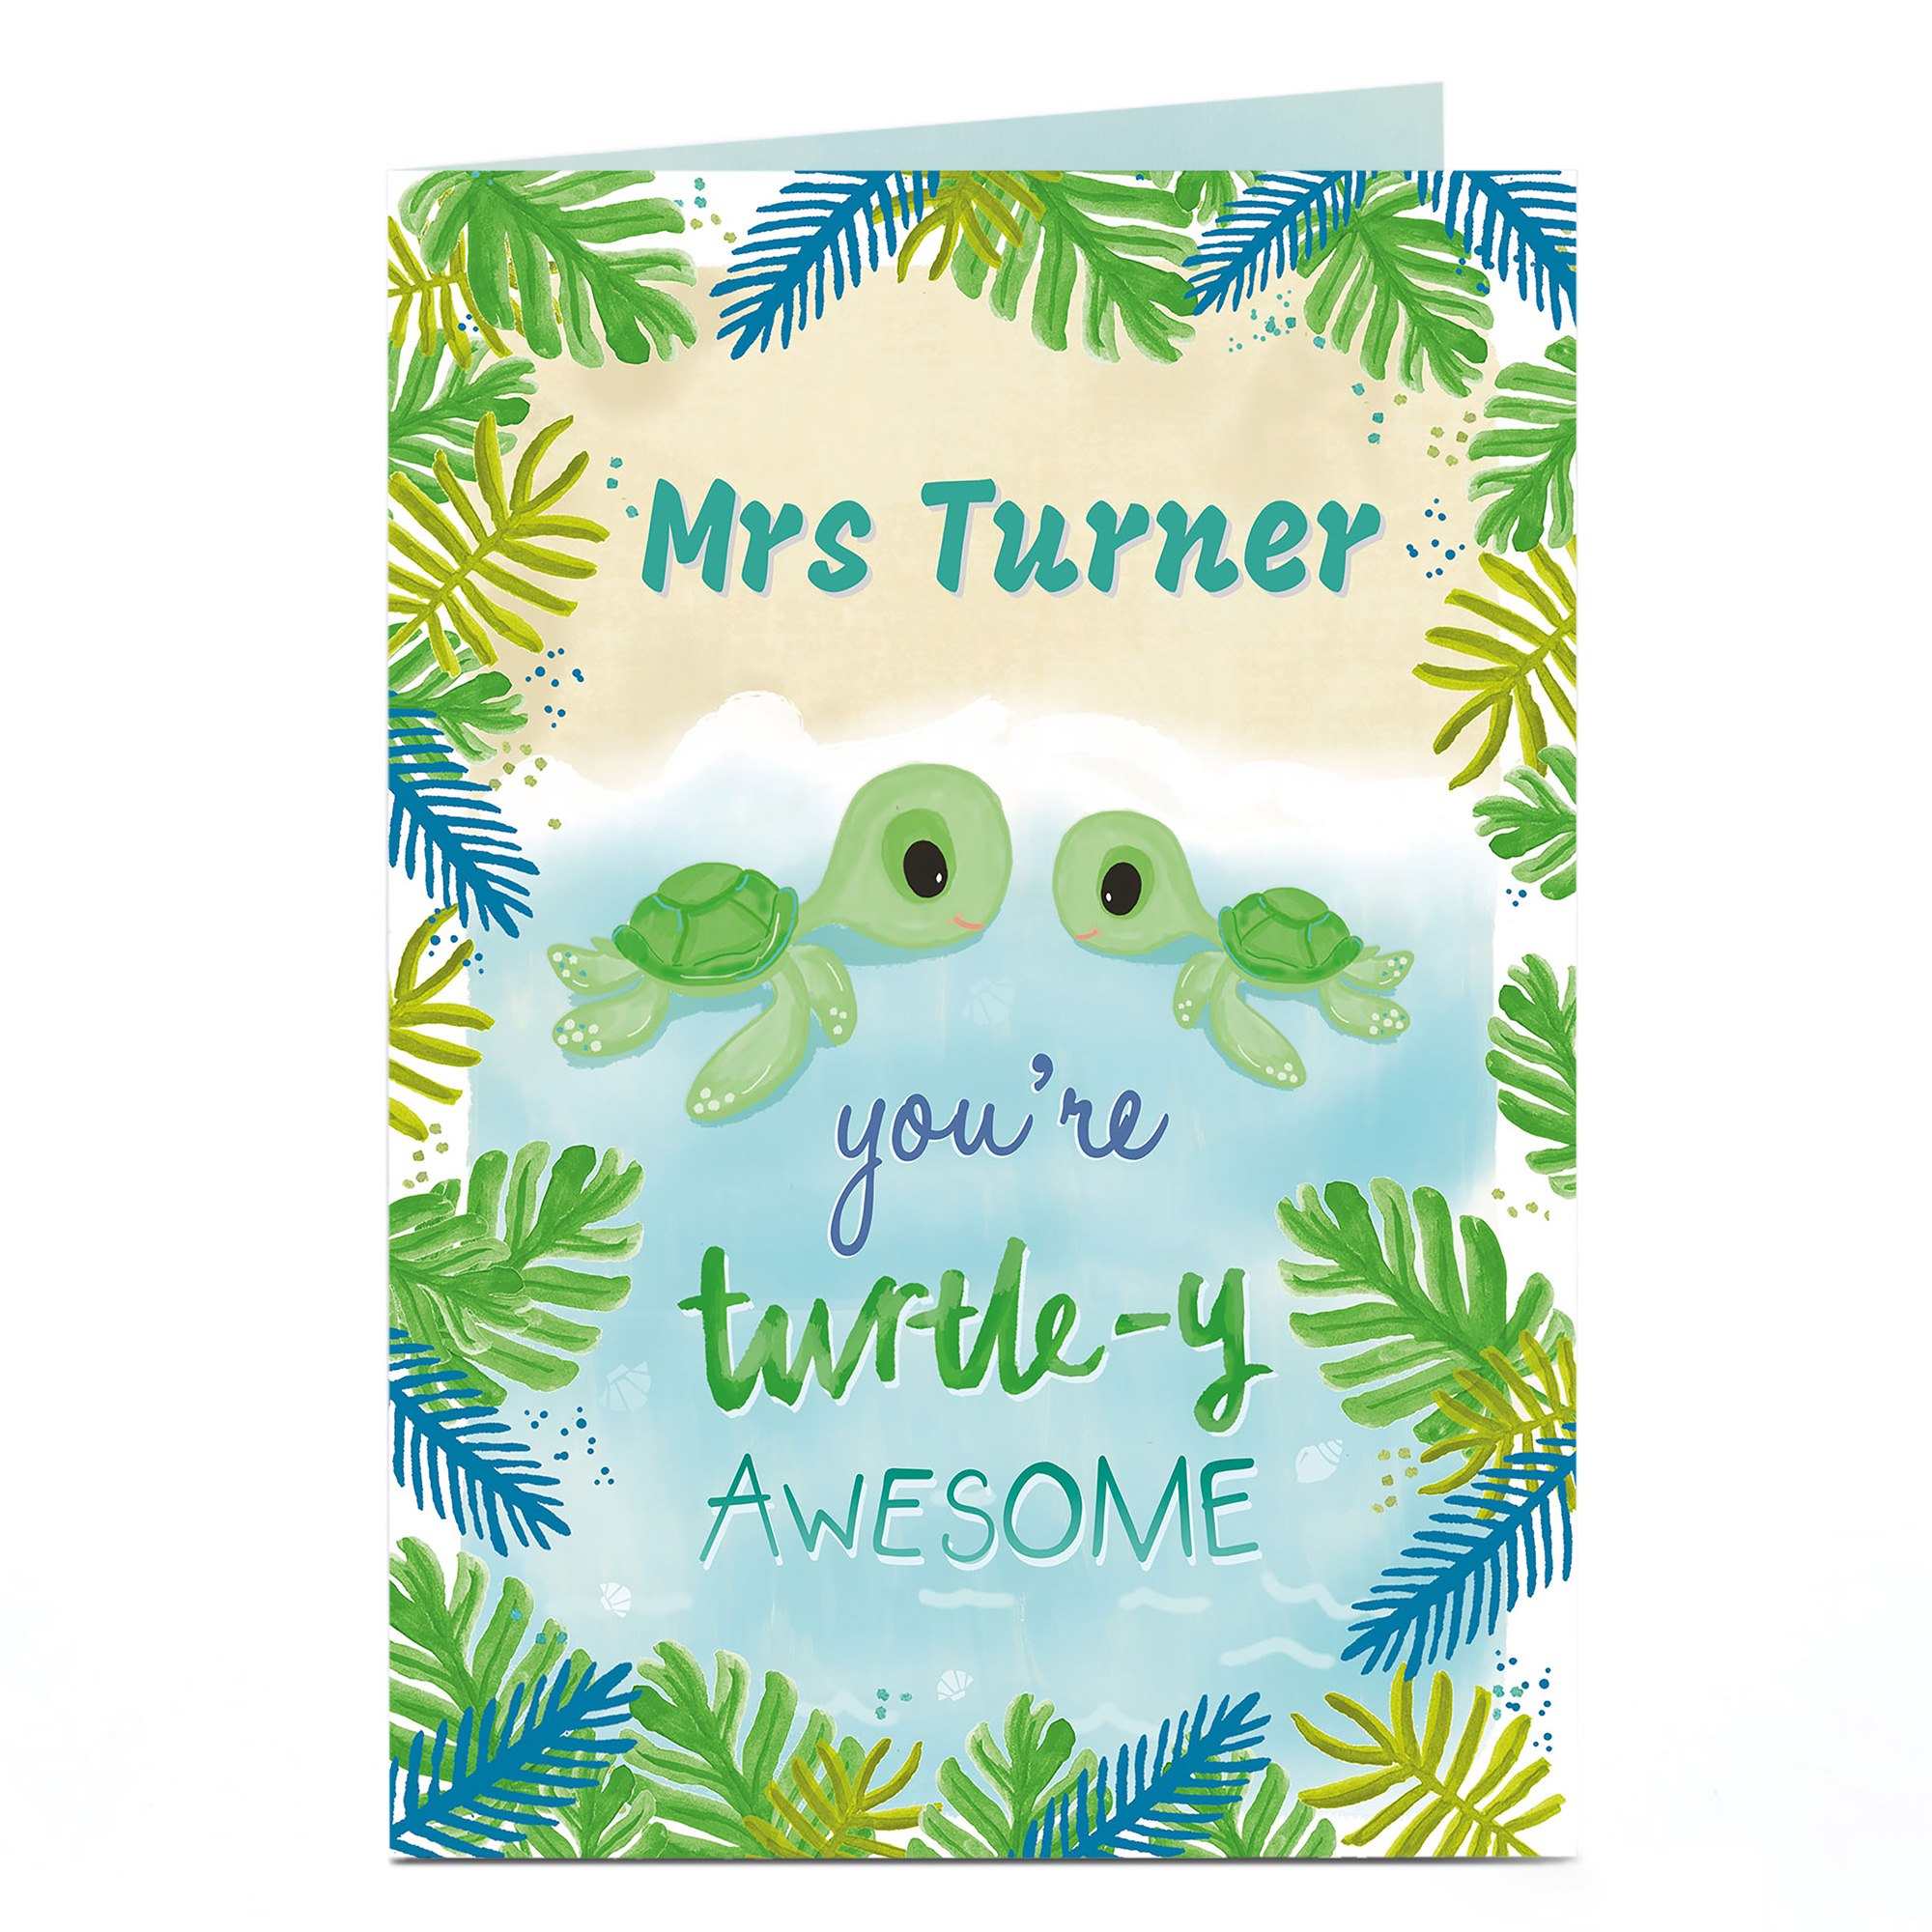 Personalised Card - Turtle-y Awesome